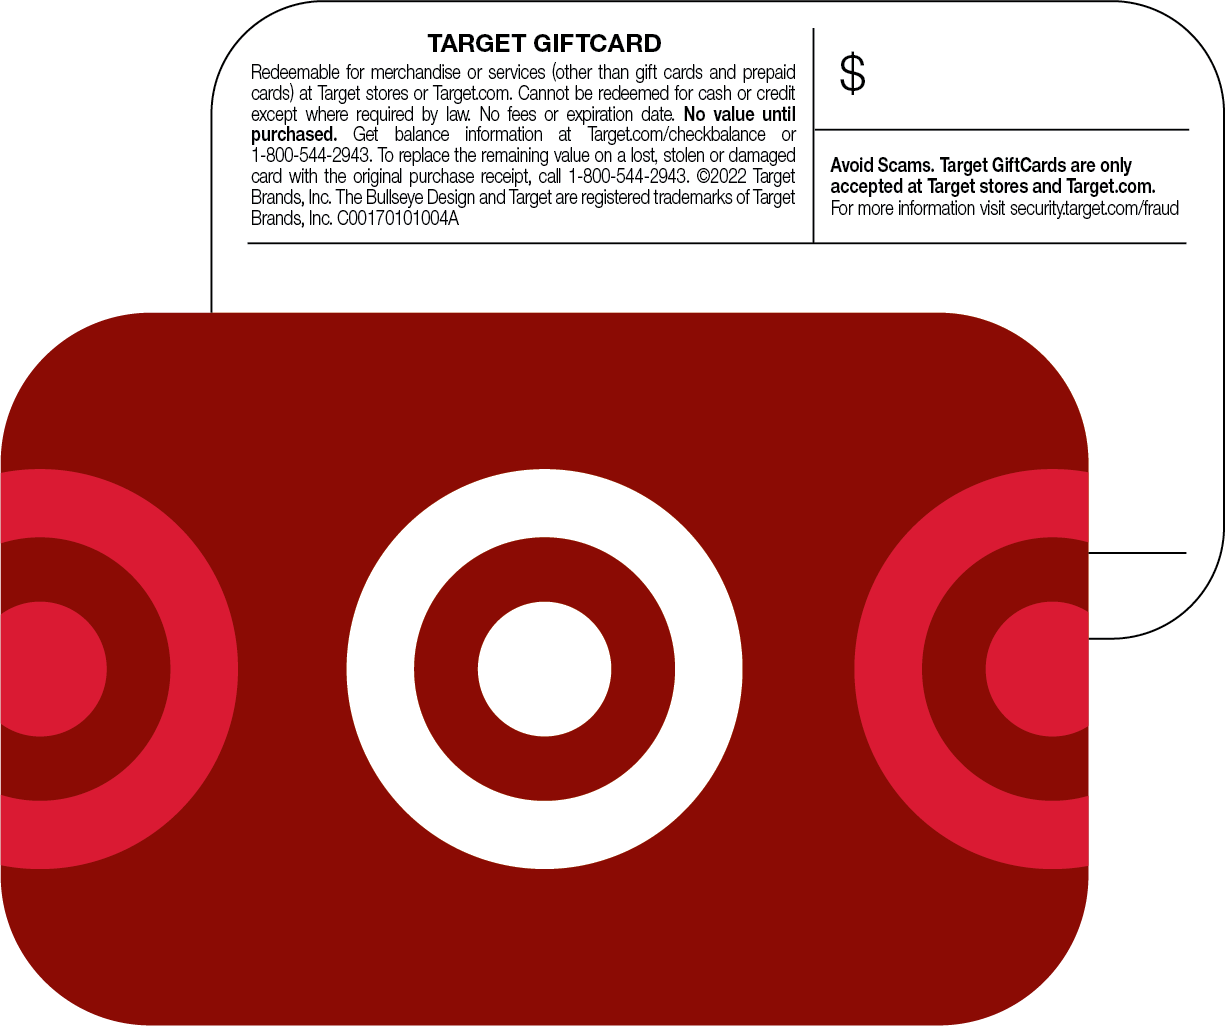 The front and back of a Target GiftCard.